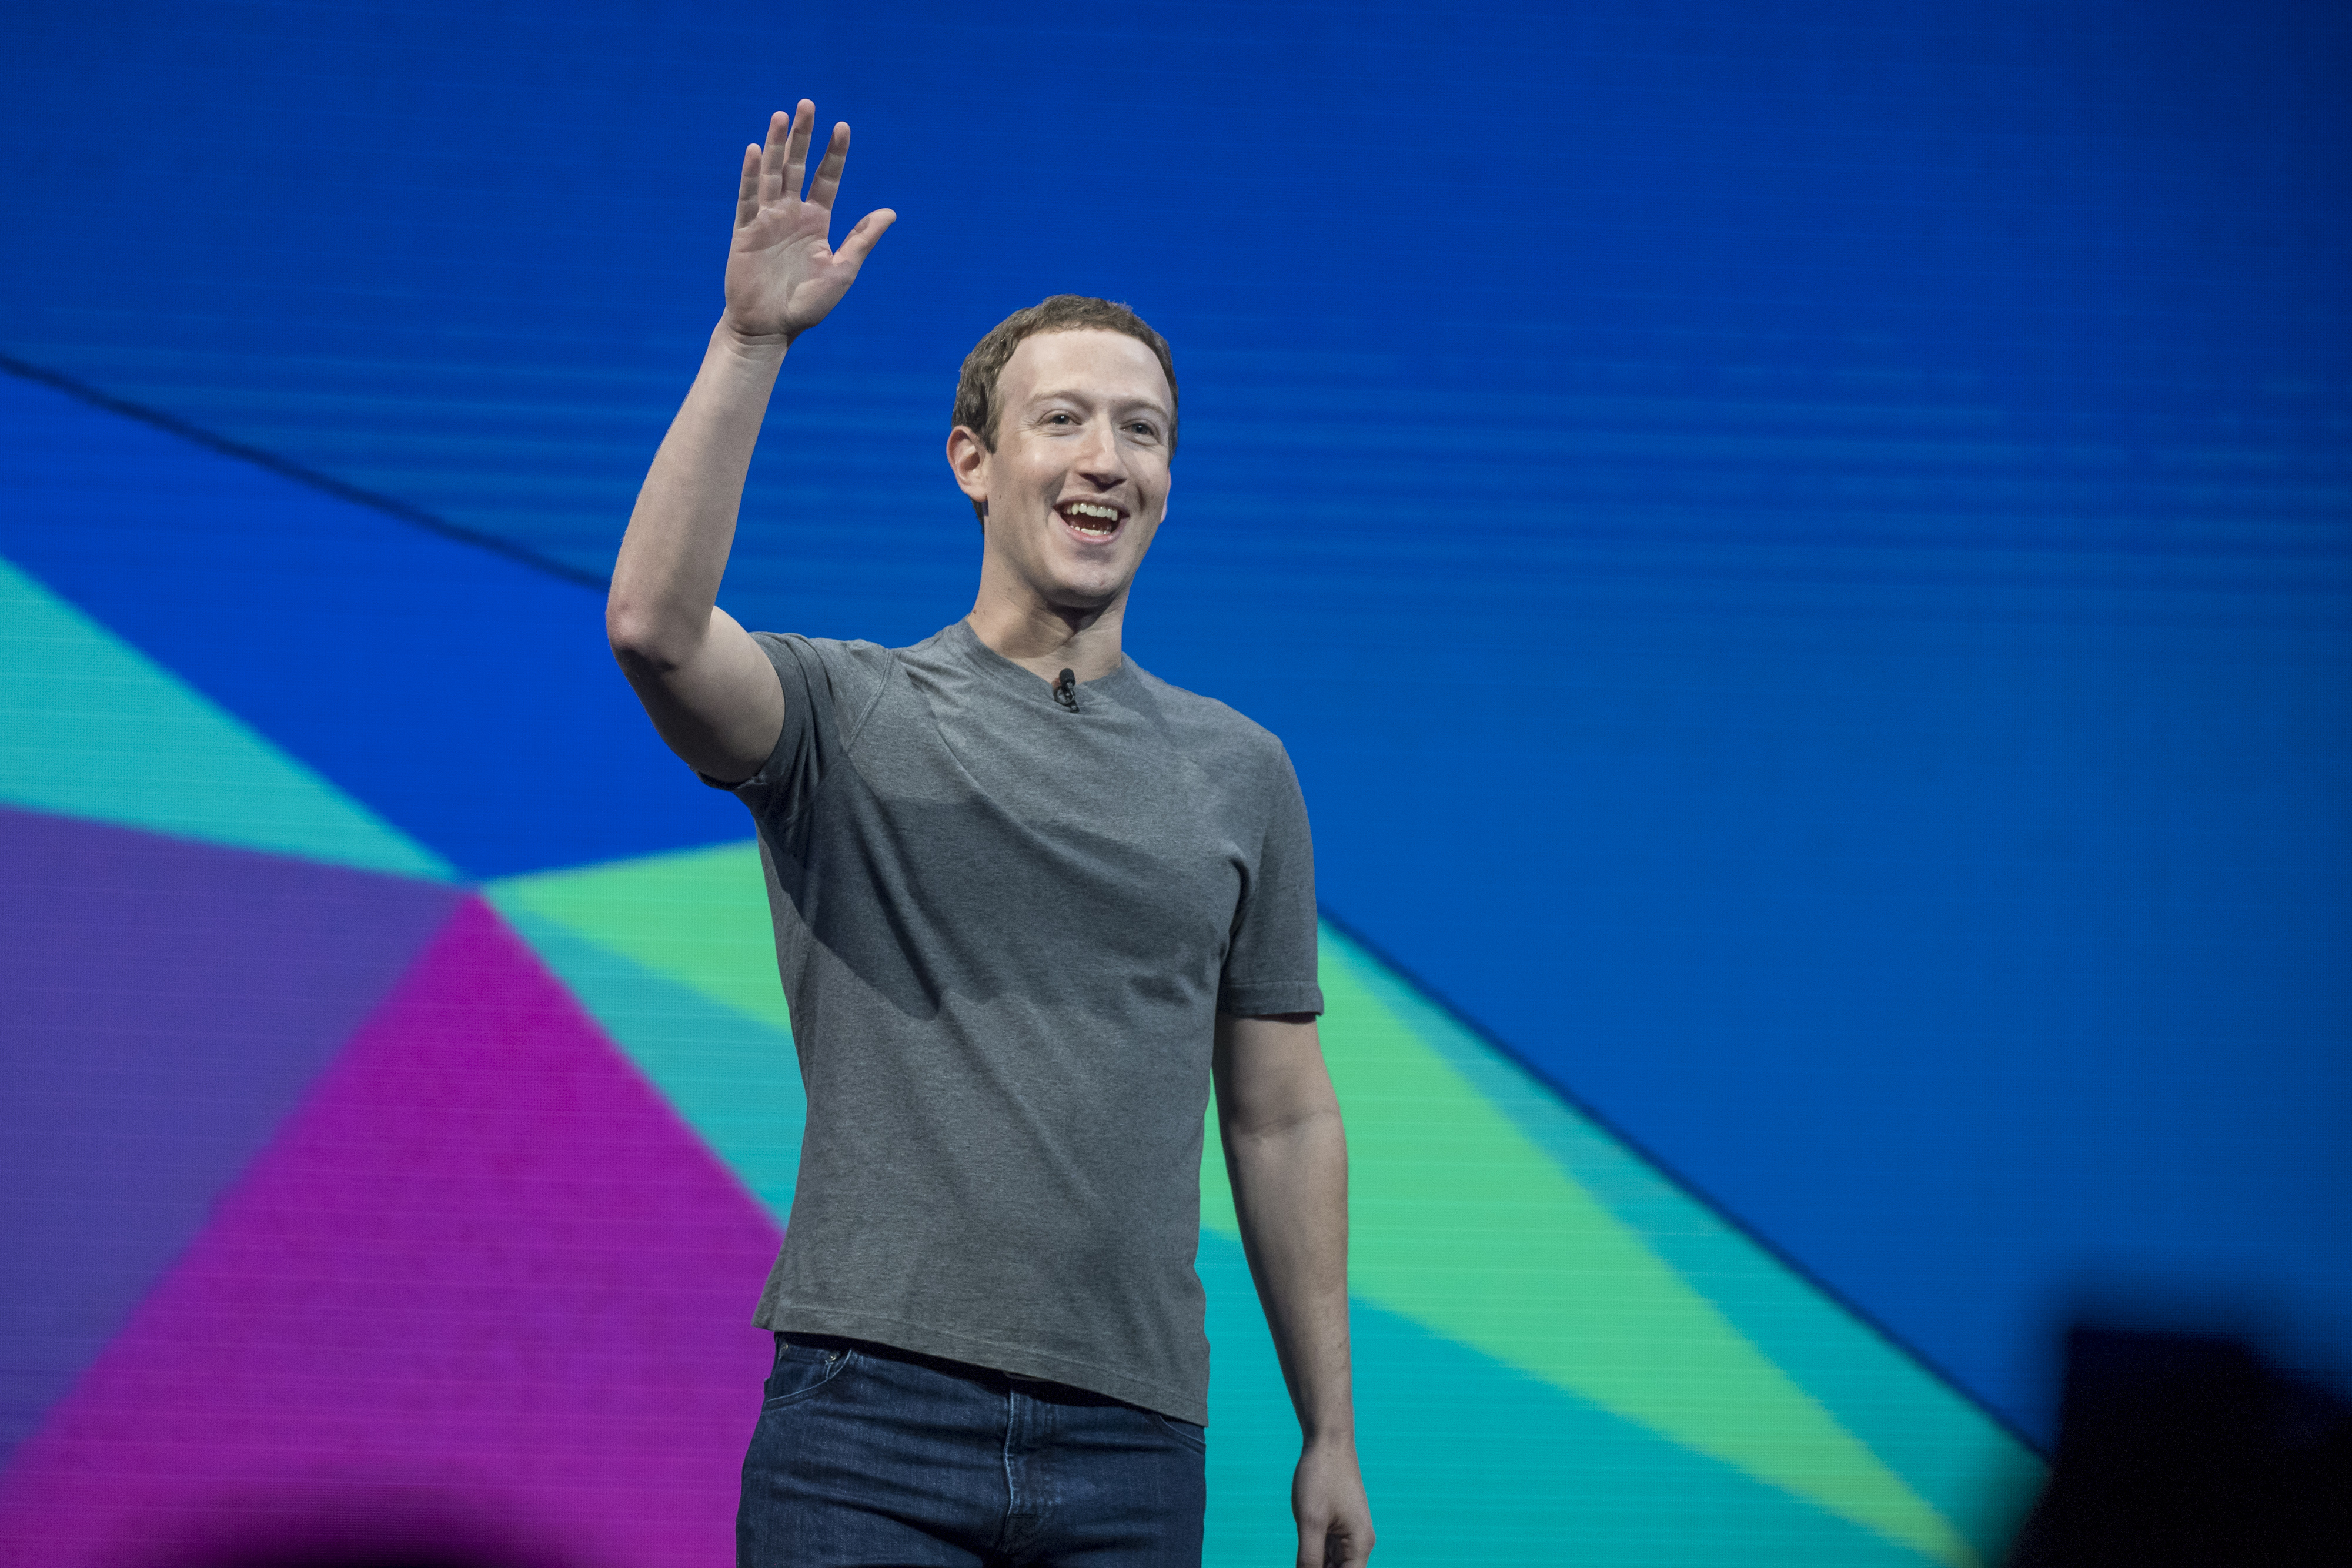 Mark Zuckerberg, chief executive officer and founder of Facebook Inc., waves to attendees during the F8 Developers Conference in San Jose, California, U.S., on Tuesday, April 18, 2017. (David Paul Morris&mdash;Bloomberg /Getty Images)